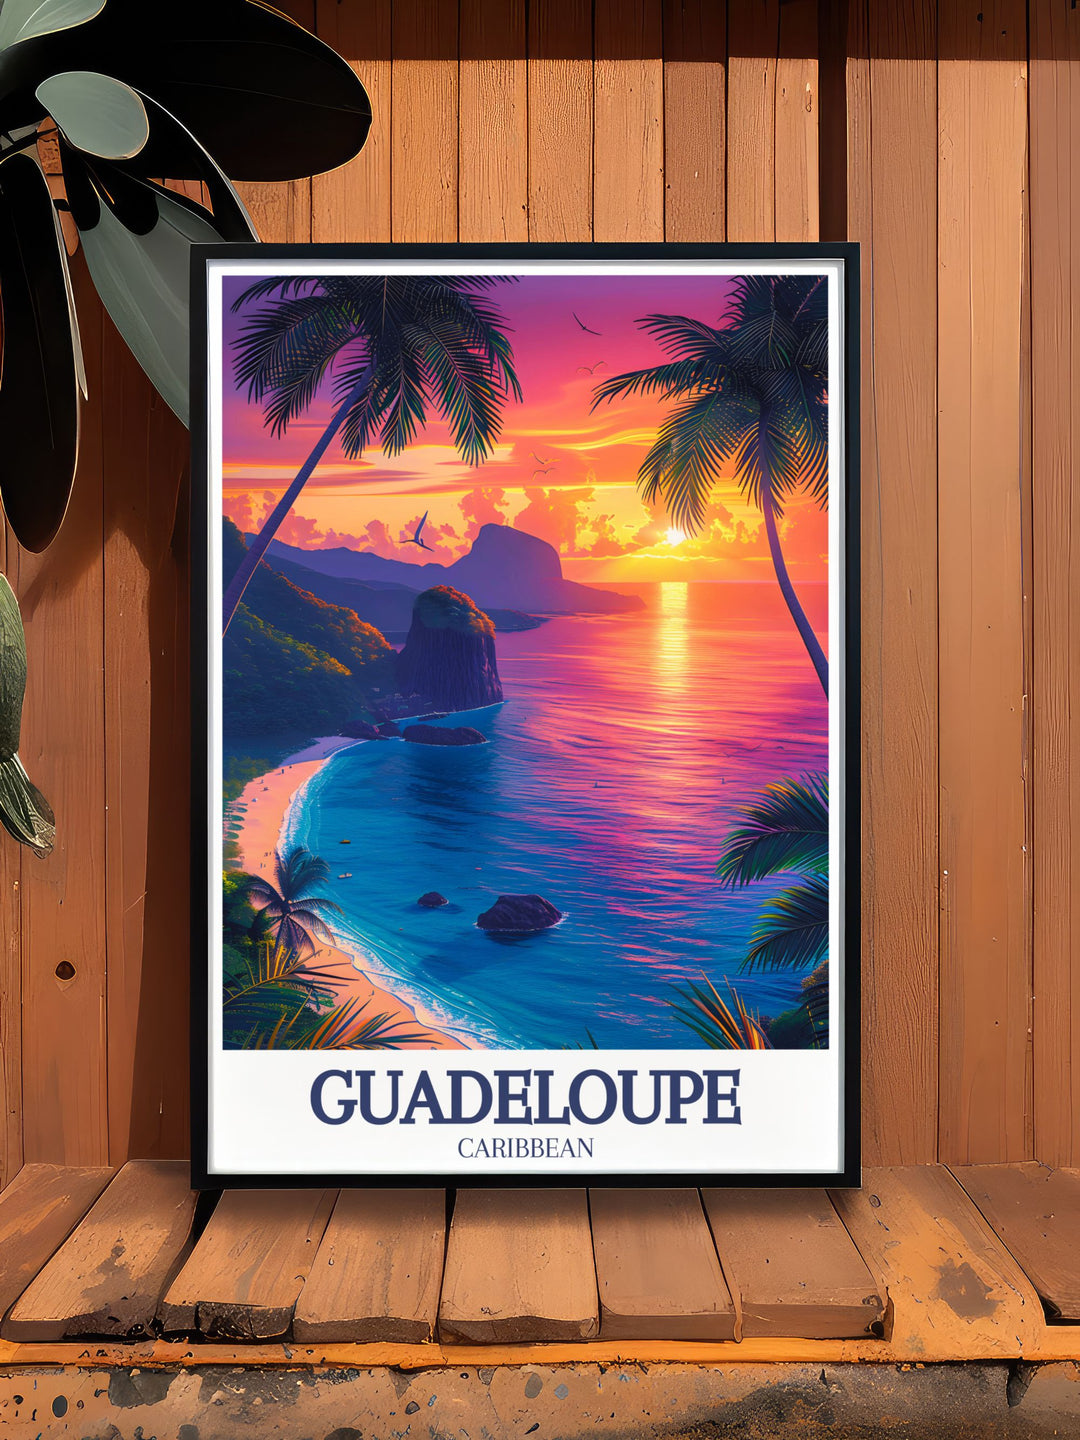 Showcasing the tranquil beauty of Grand Anse beaches, this poster features the pristine sand and clear waters of one of the Caribbeans most stunning coastlines. Ideal for those who dream of tropical getaways, this artwork brings serenity to any room.